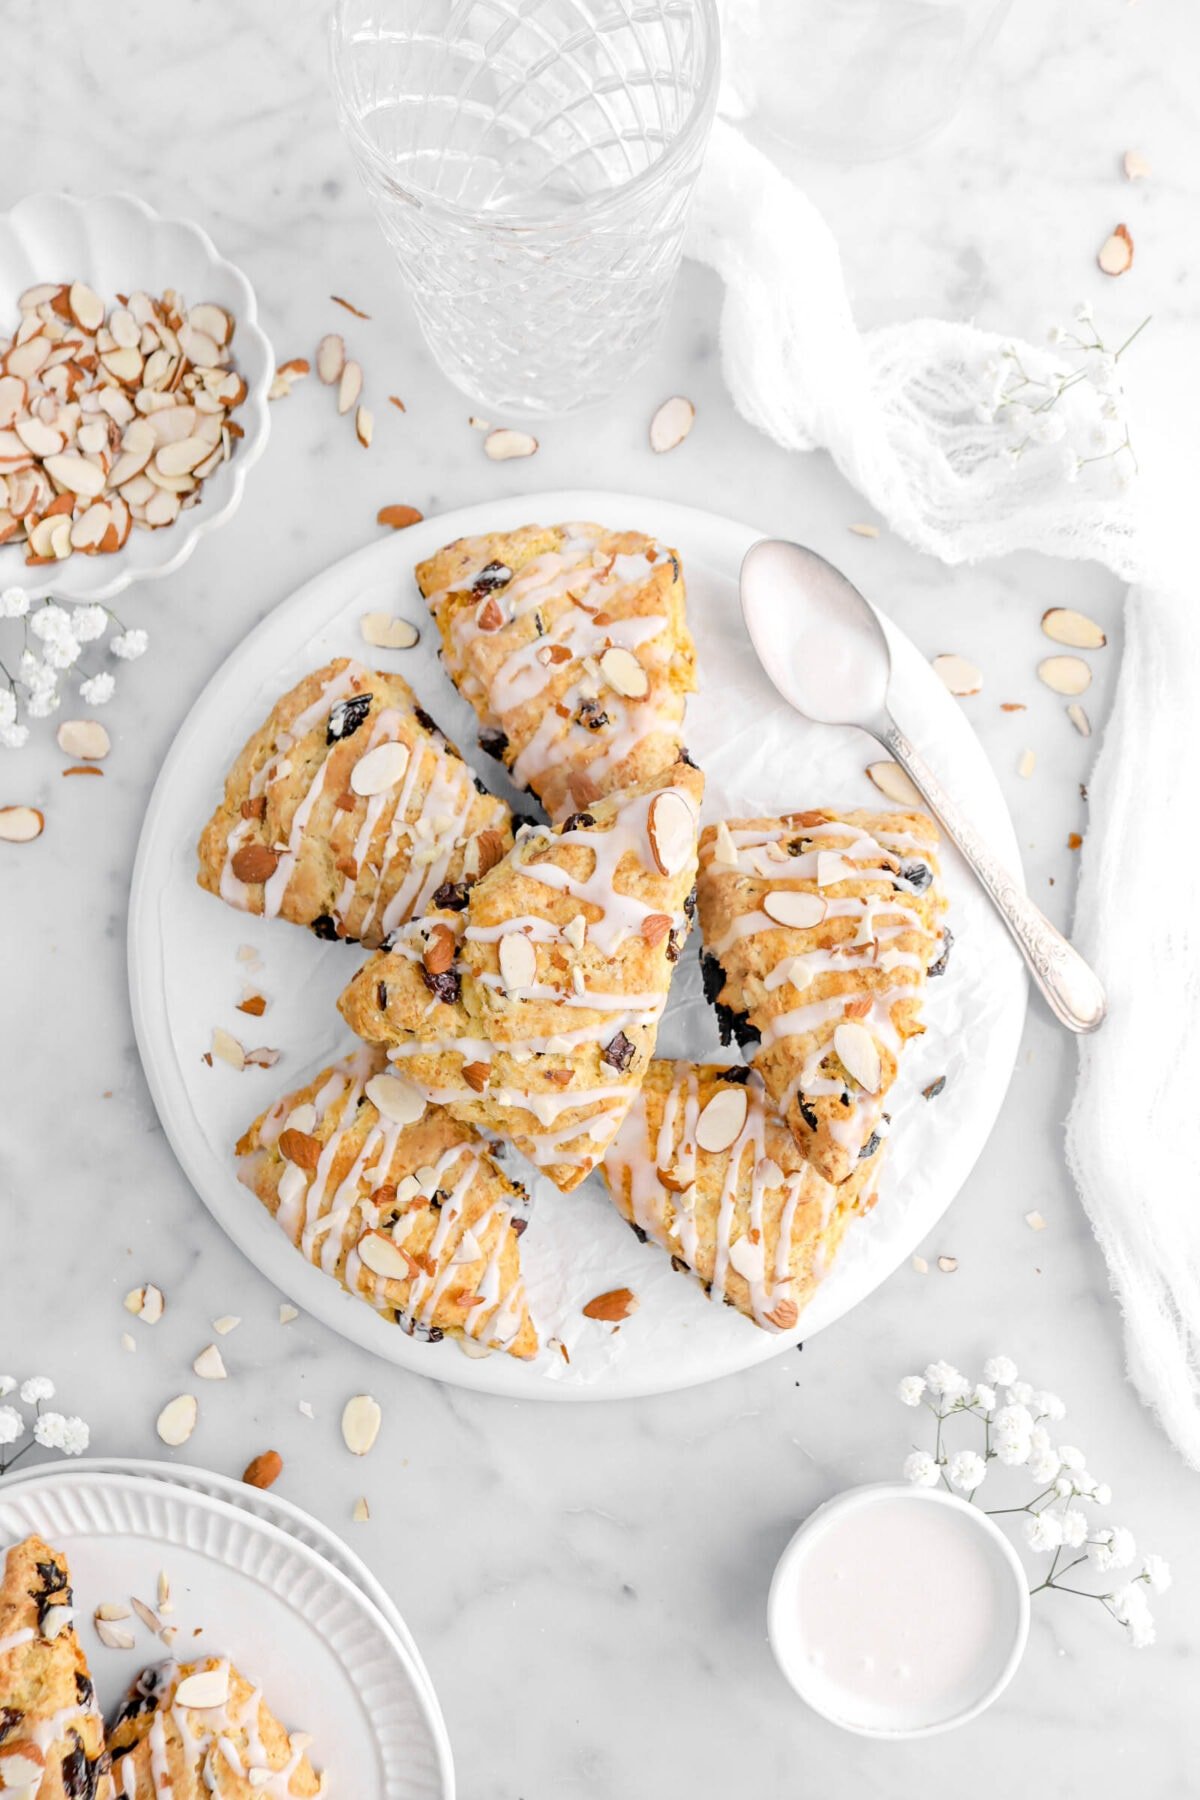 scones piled on upside down white plate with spoon beside, white flowers, almonds, and a cheese cloth around on marble surface.